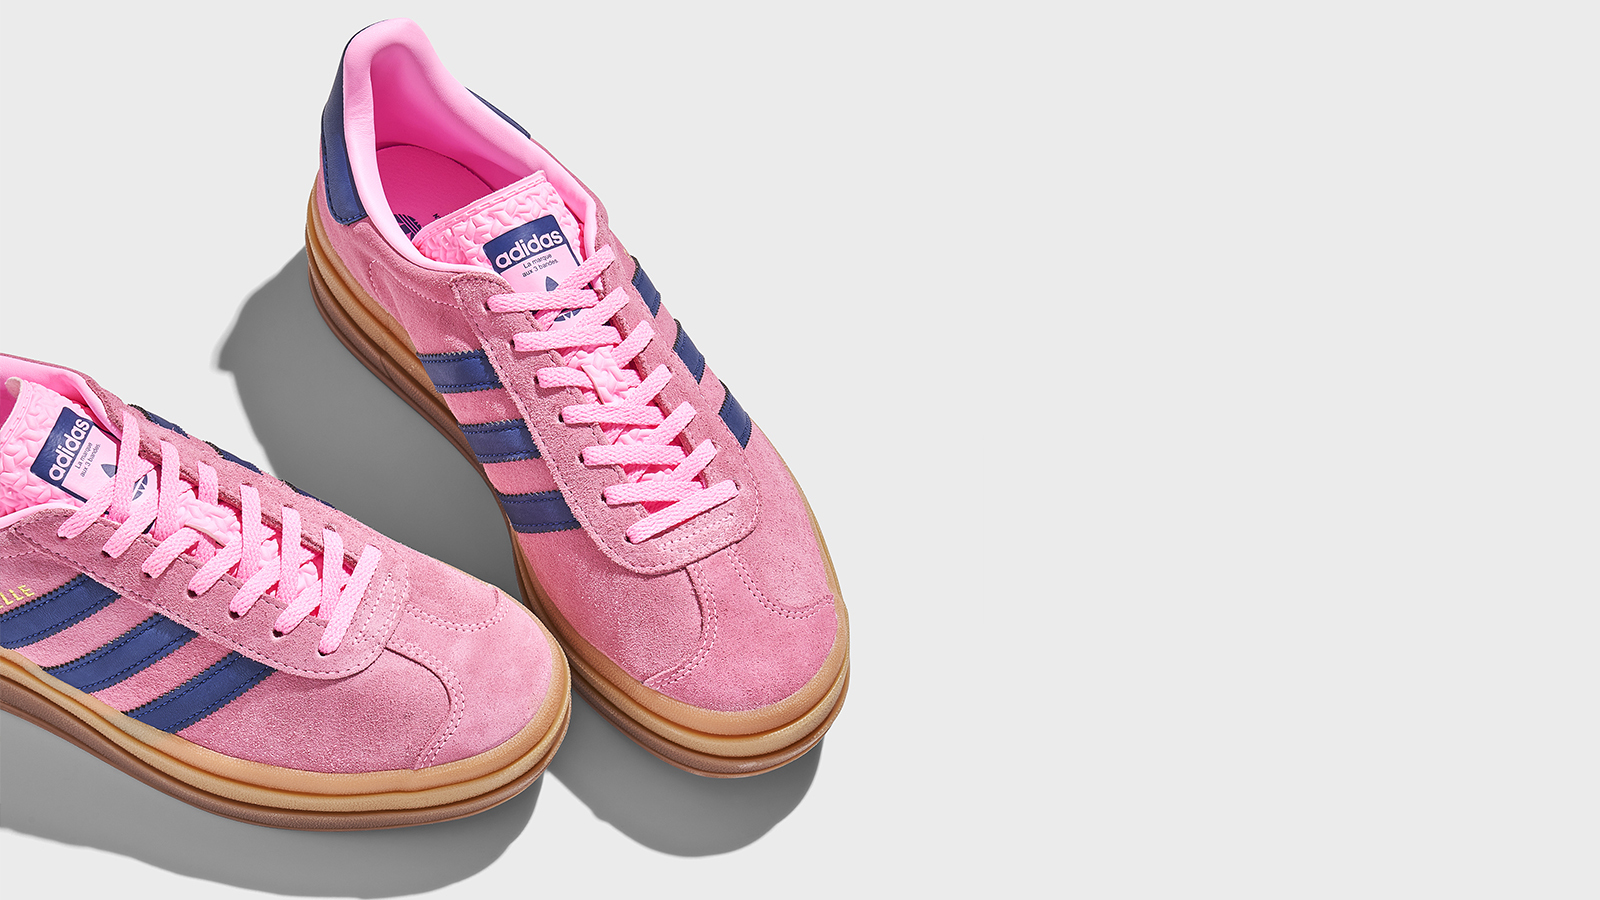 Why Is The Adidas Gazelle So Popular Right Now